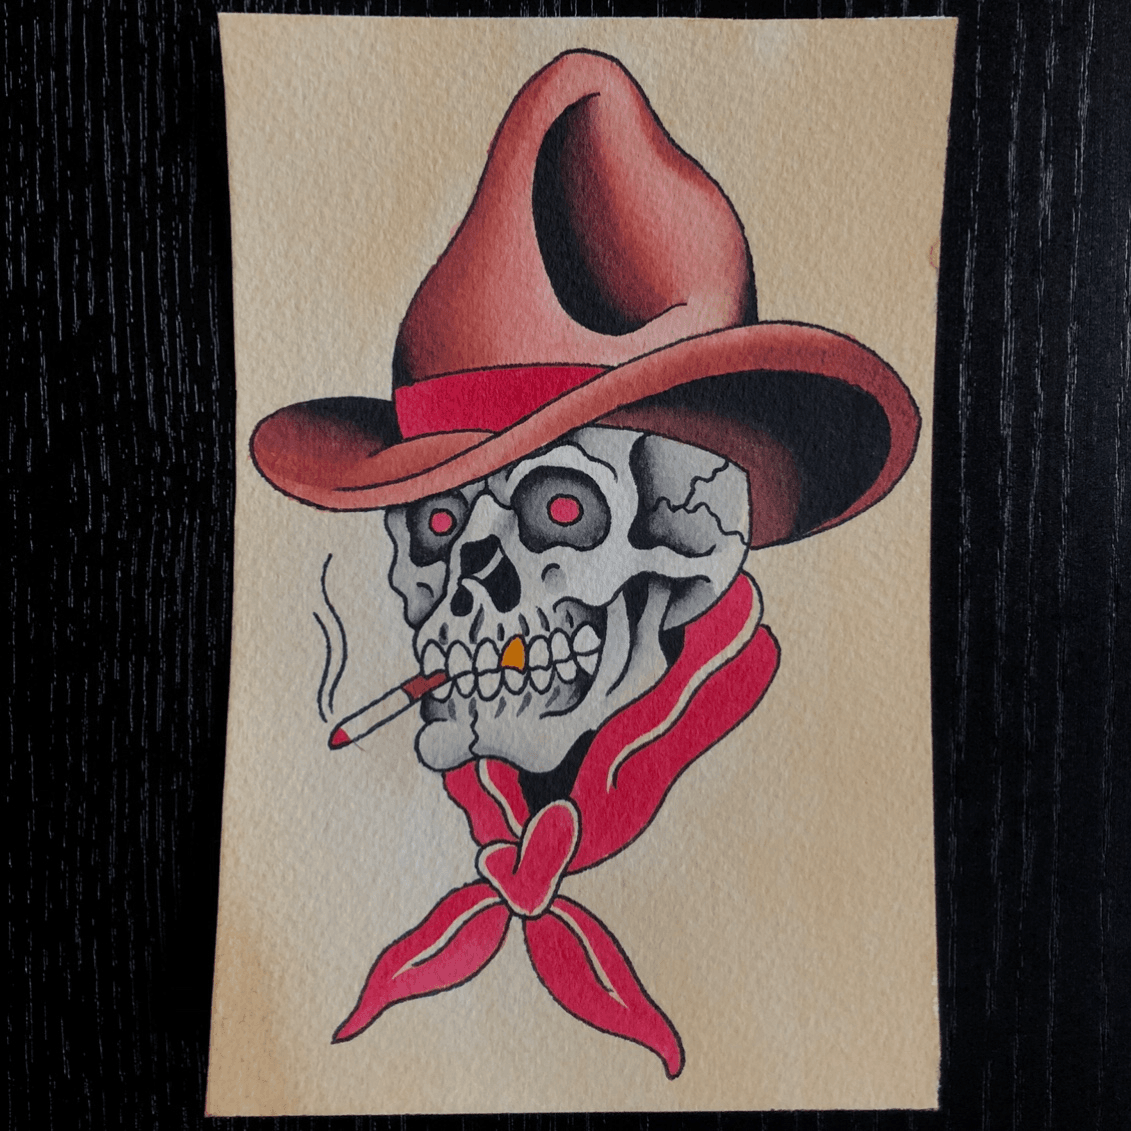 How to Draw an Old School Tattoo Flash Design Halloween SKULL COWBOY   Coloring Book Page  YouTube